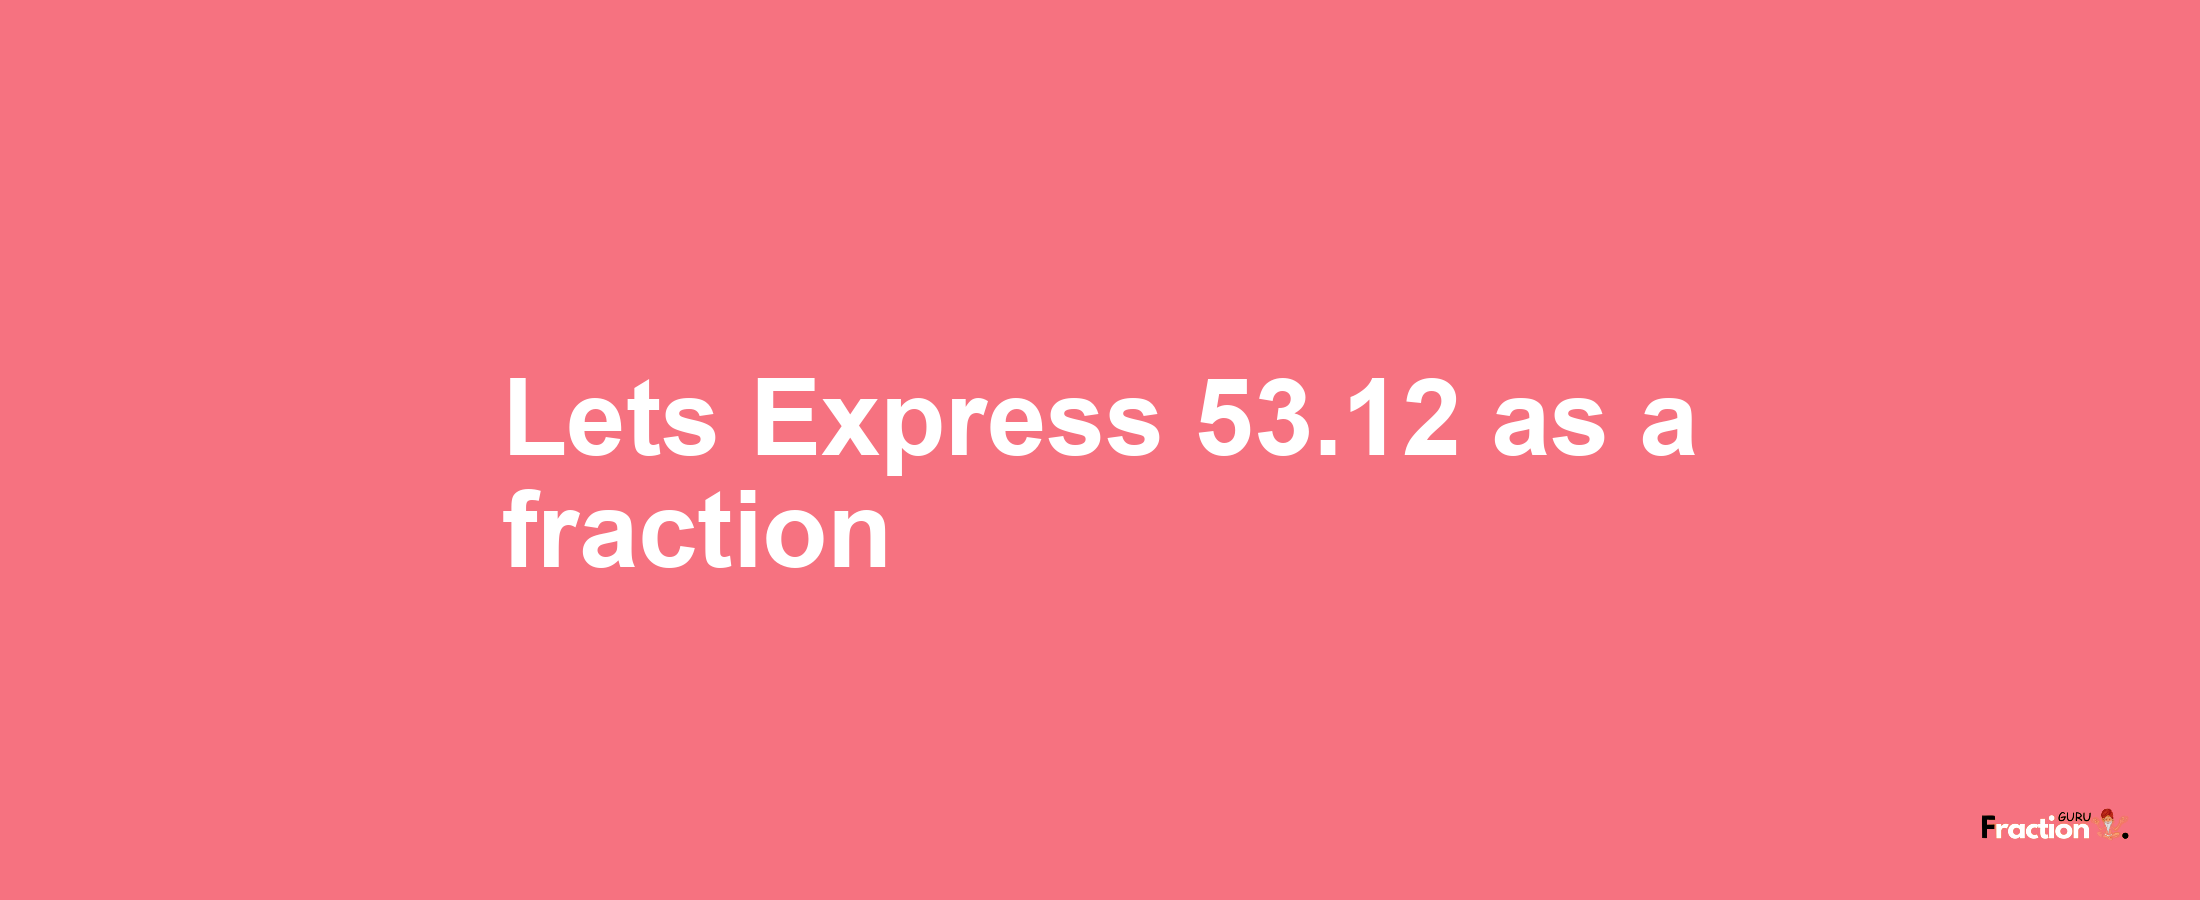 Lets Express 53.12 as afraction